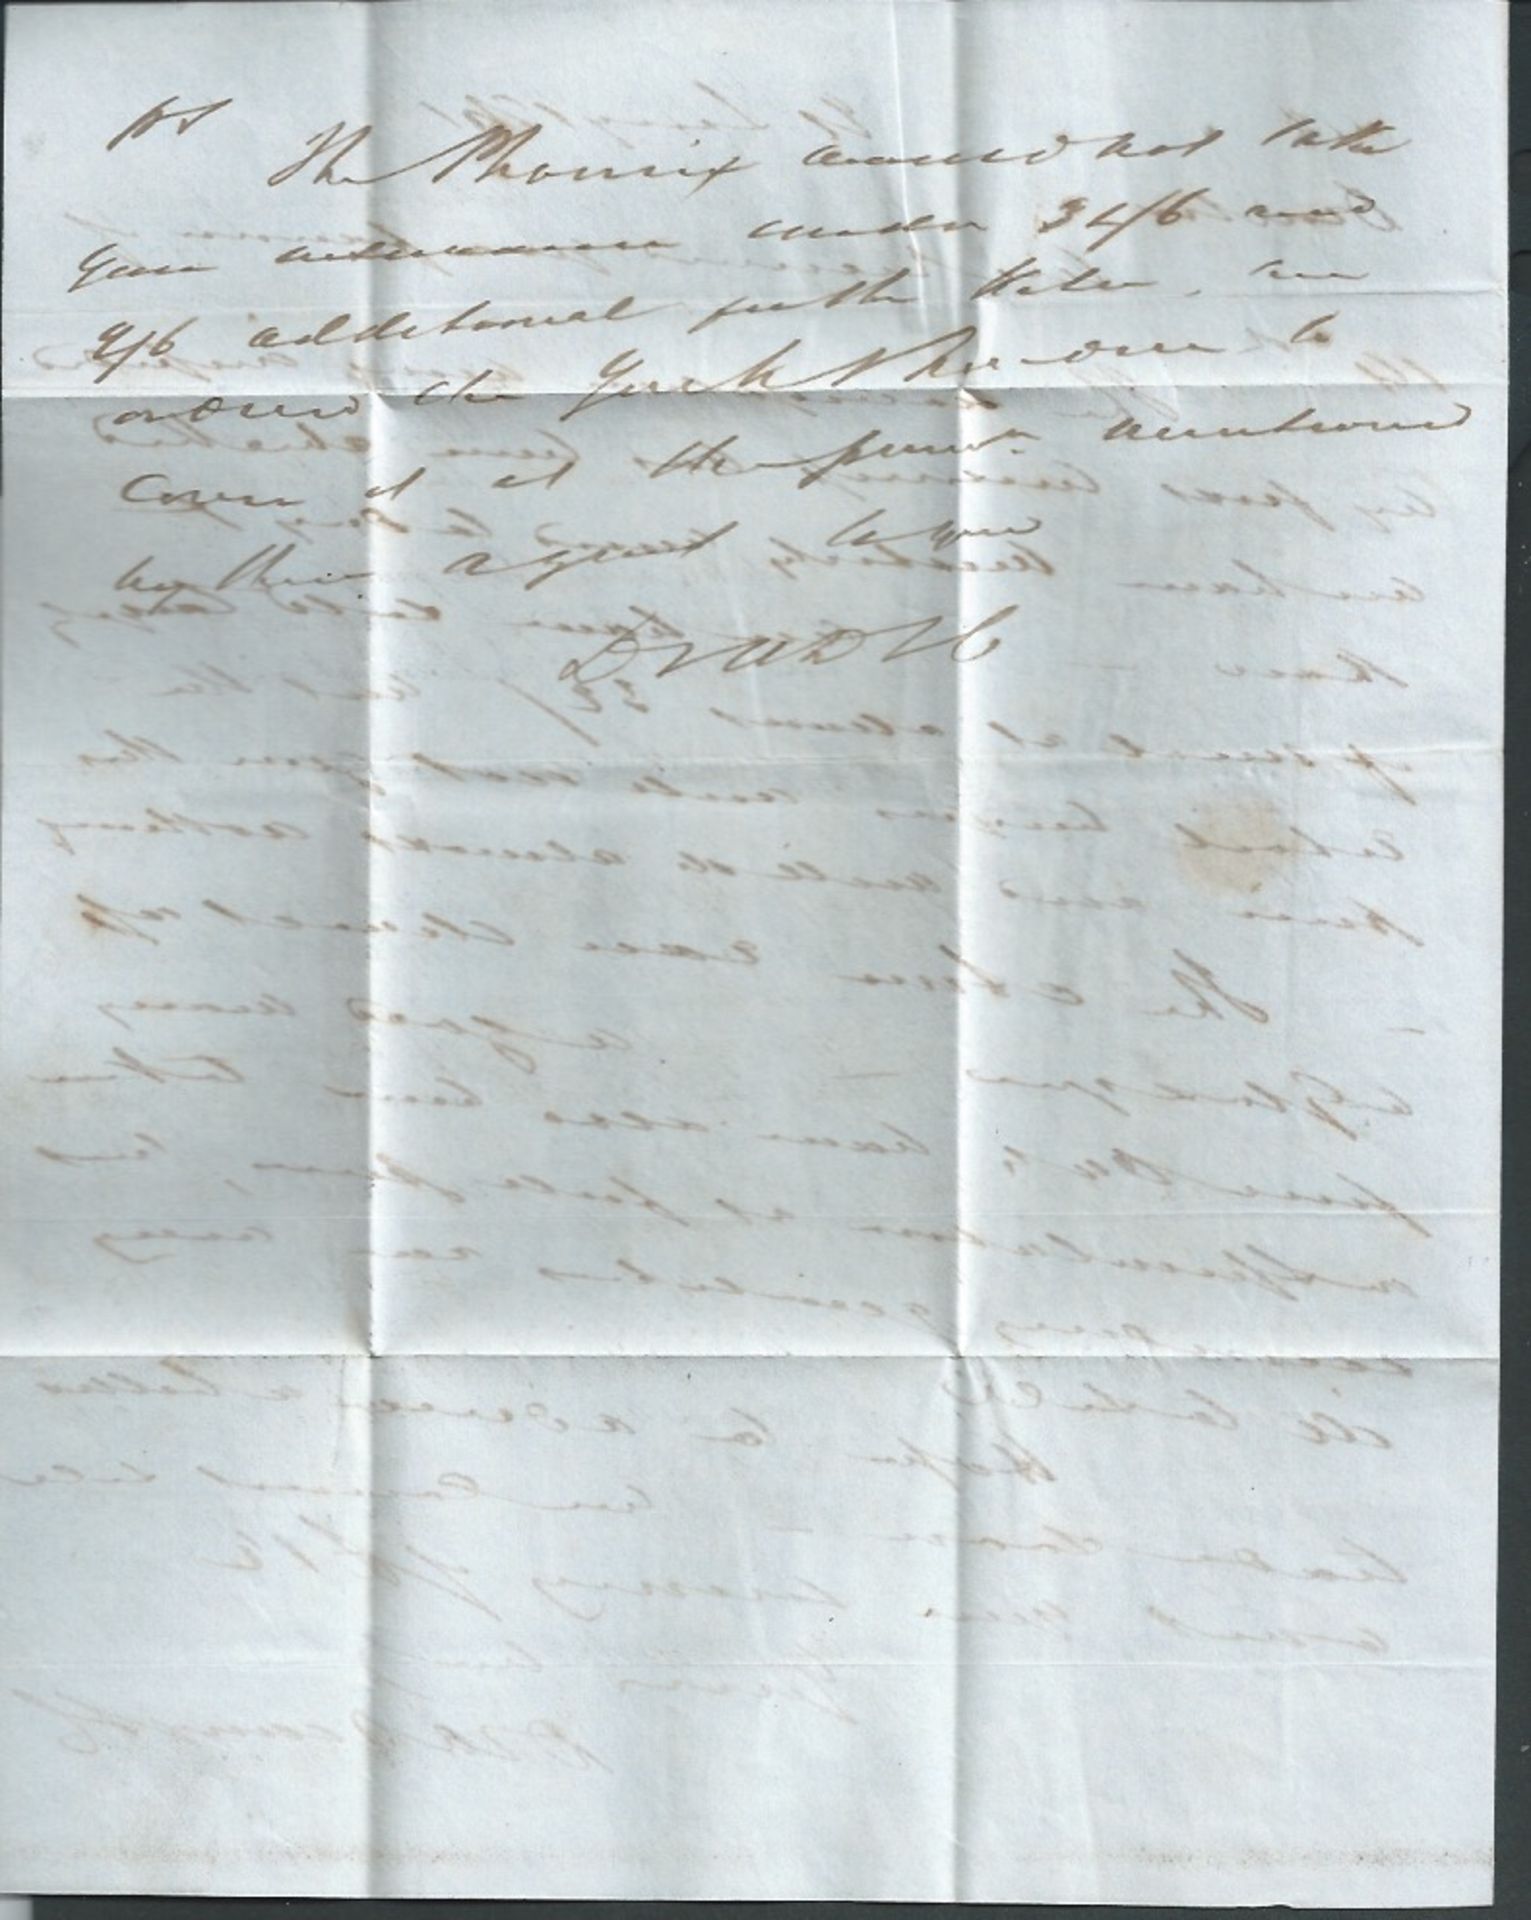 G.B. - Scotland 1841 Entire Letter from Glasgow prepaid 1d to Collooney with a fine strike of the s - Image 4 of 6